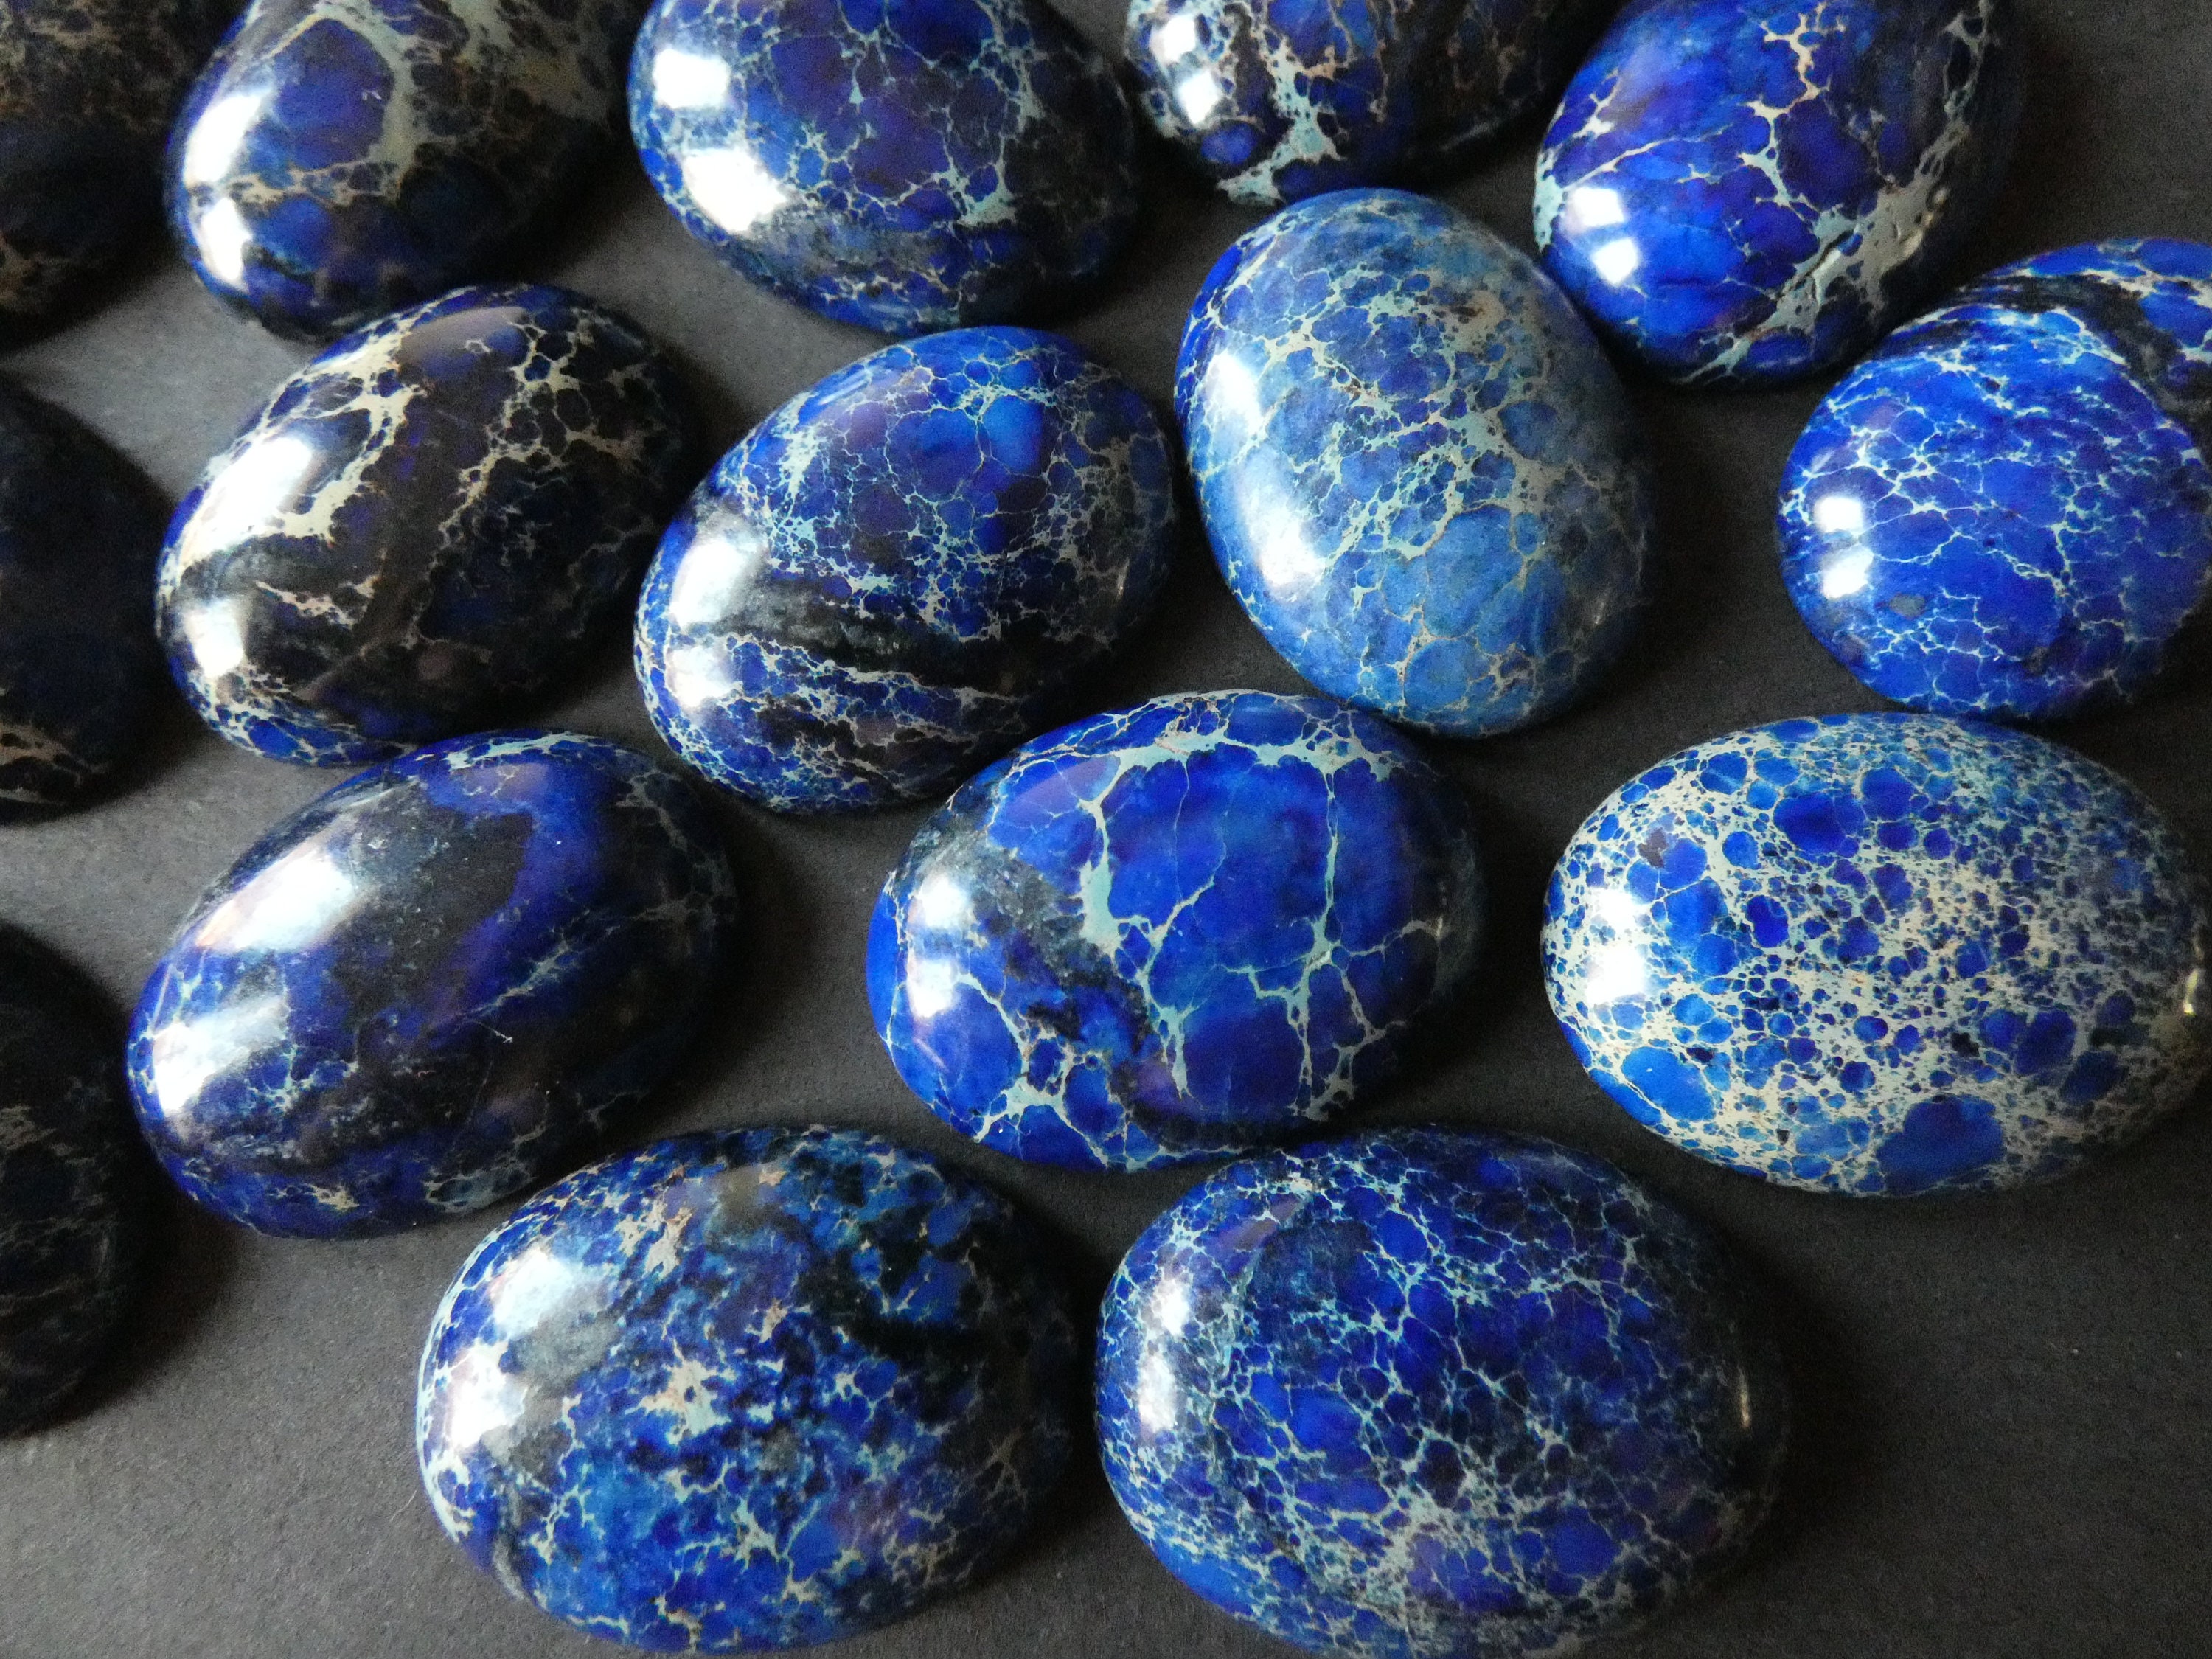 30x22mm Regalite Cabochon, Dyed Oval Cabochon, Polished Regalite Stone ...